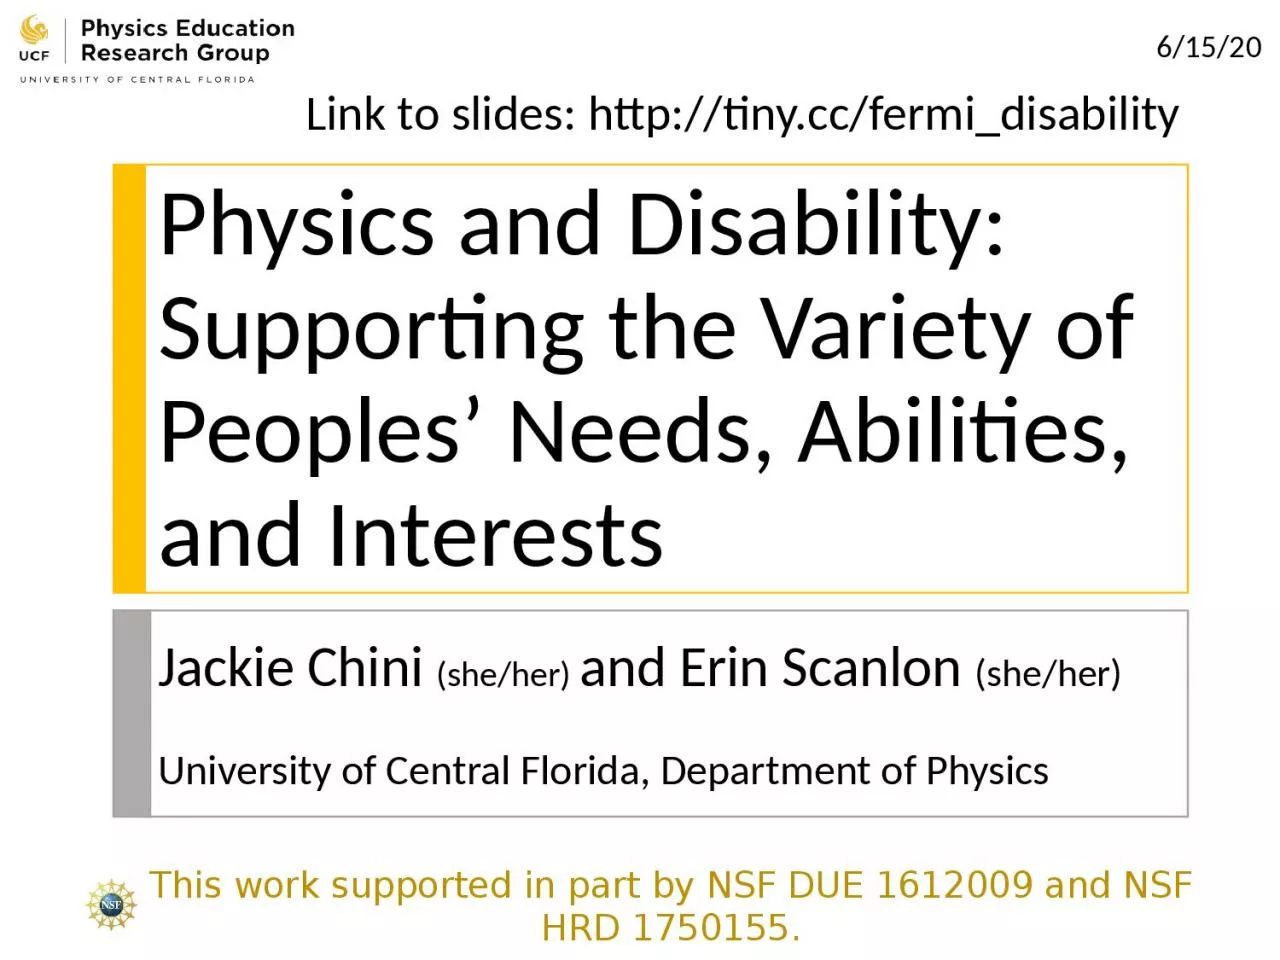 Physics and Disability: Supporting the Variety of Peoples’ Needs, Abilities, and Interests